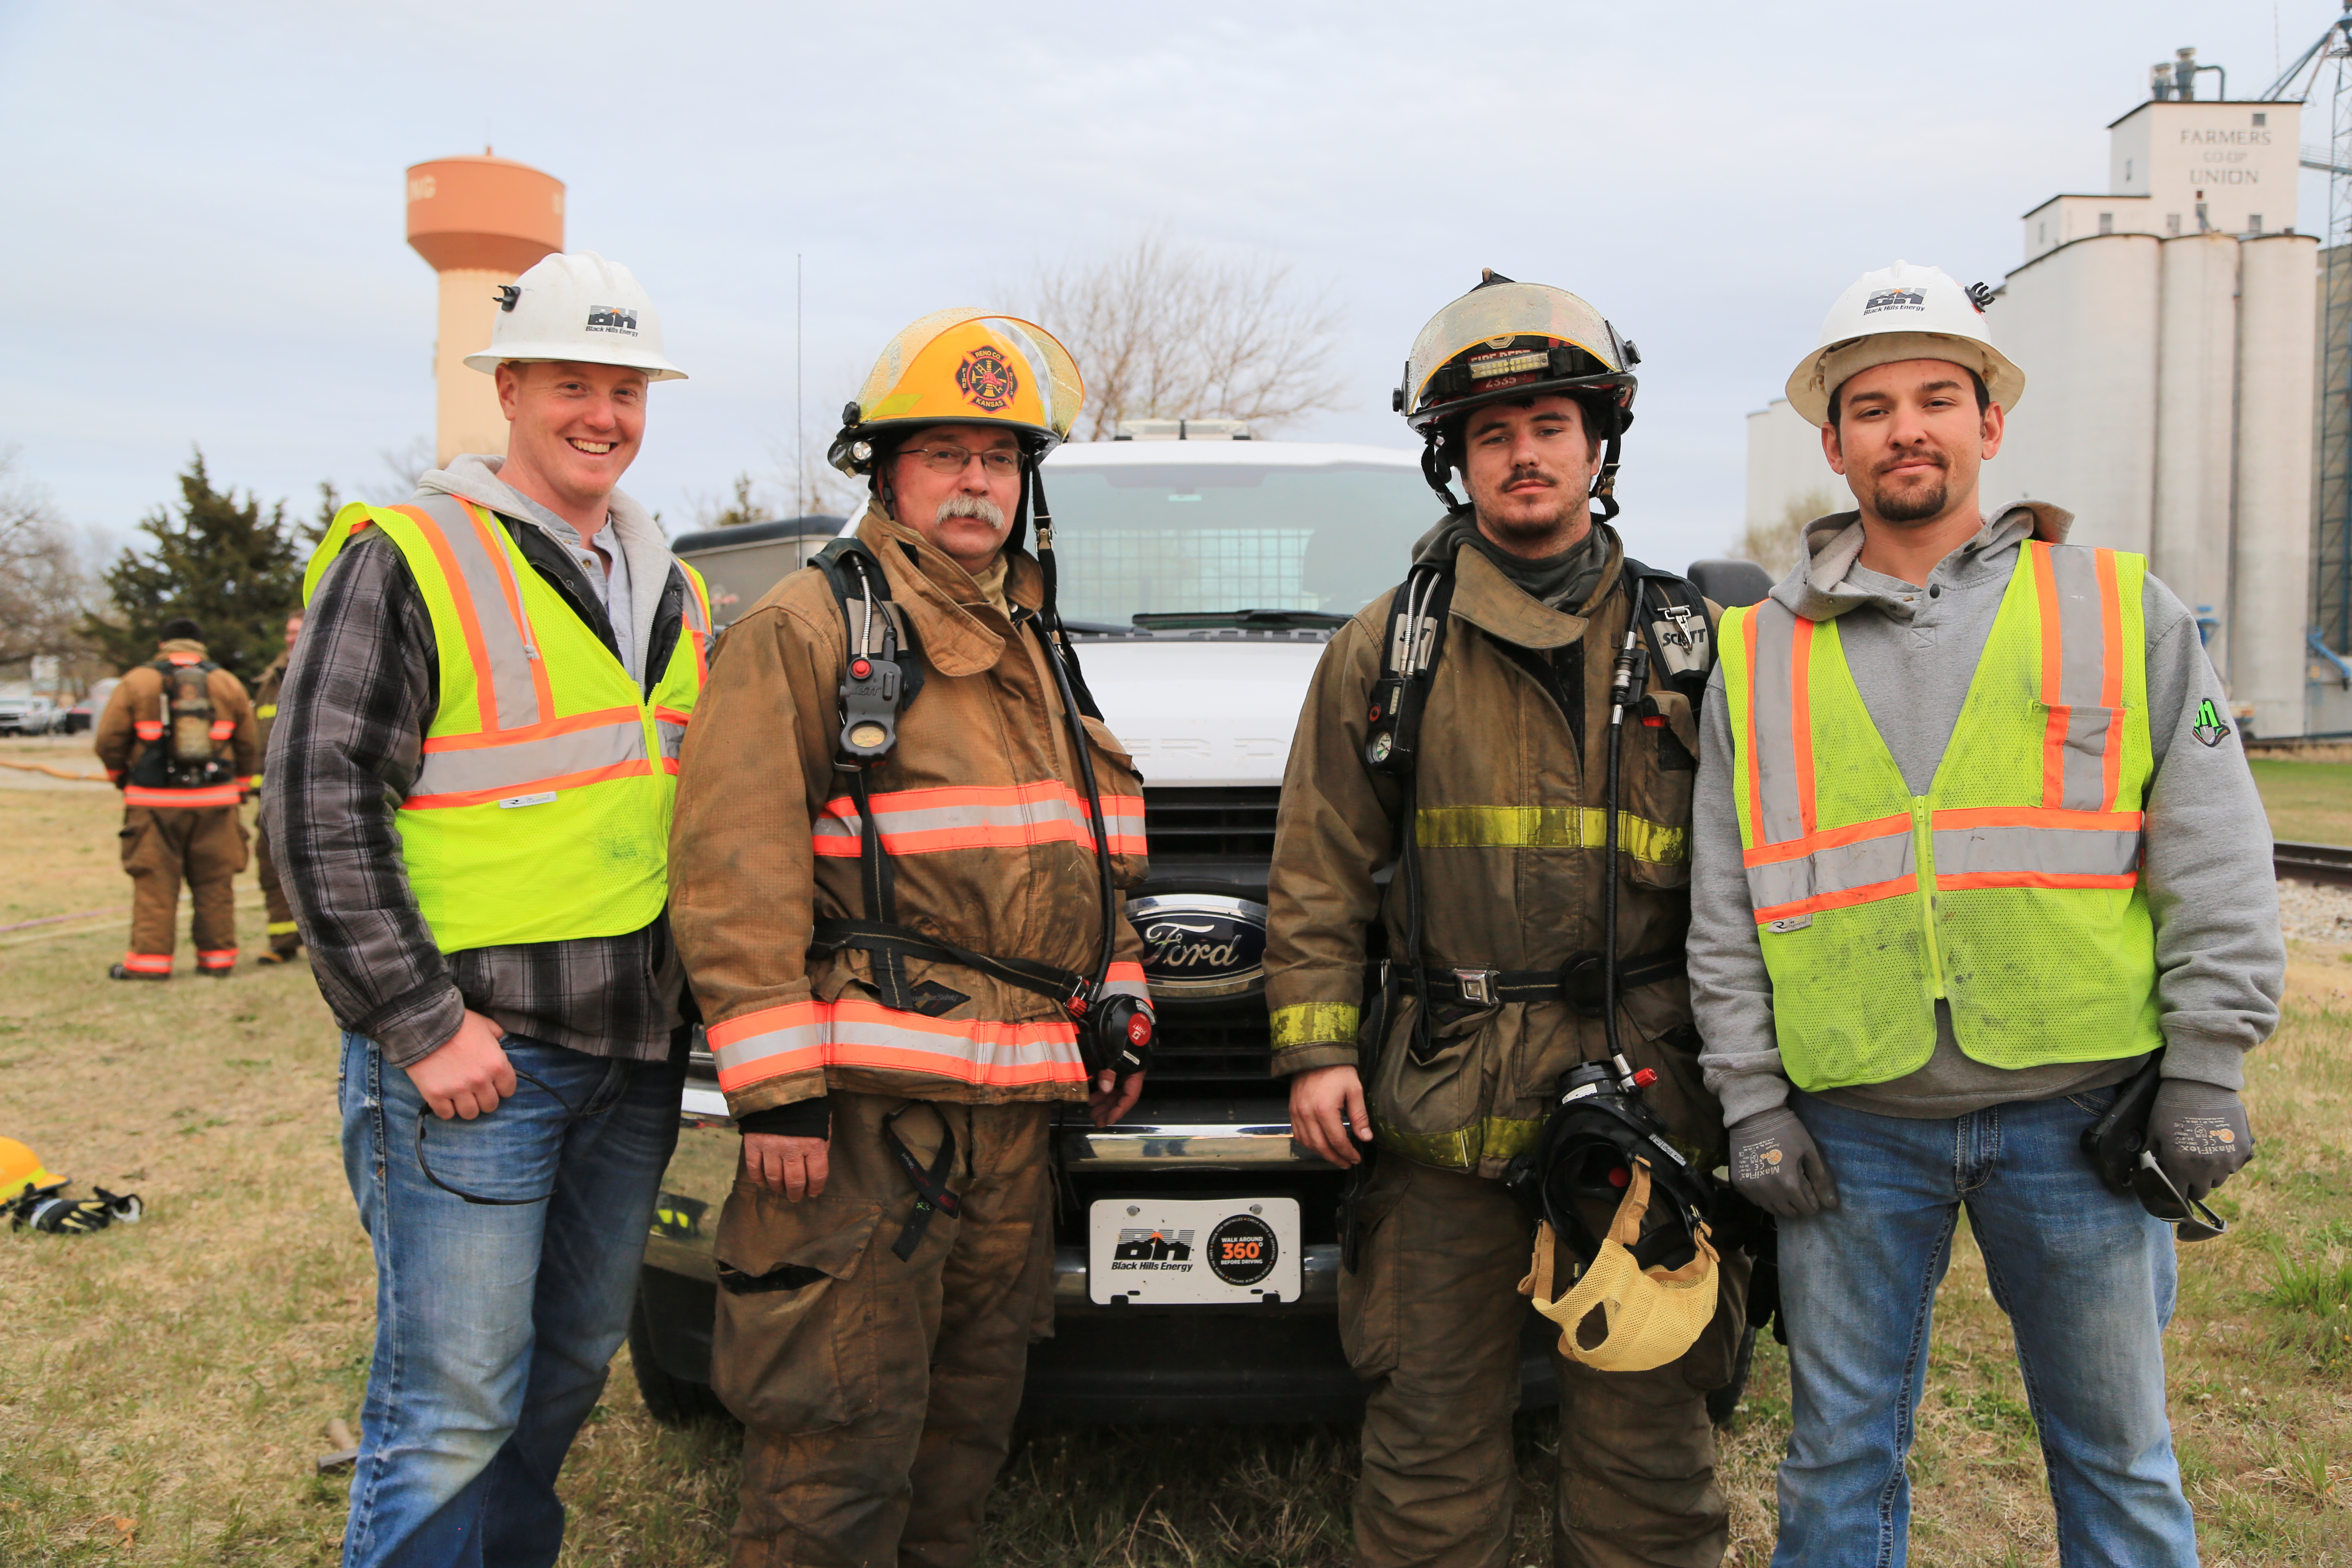 Black Hills Energy staff partners with volunteer firefighters in a recent Kansas fire safety training